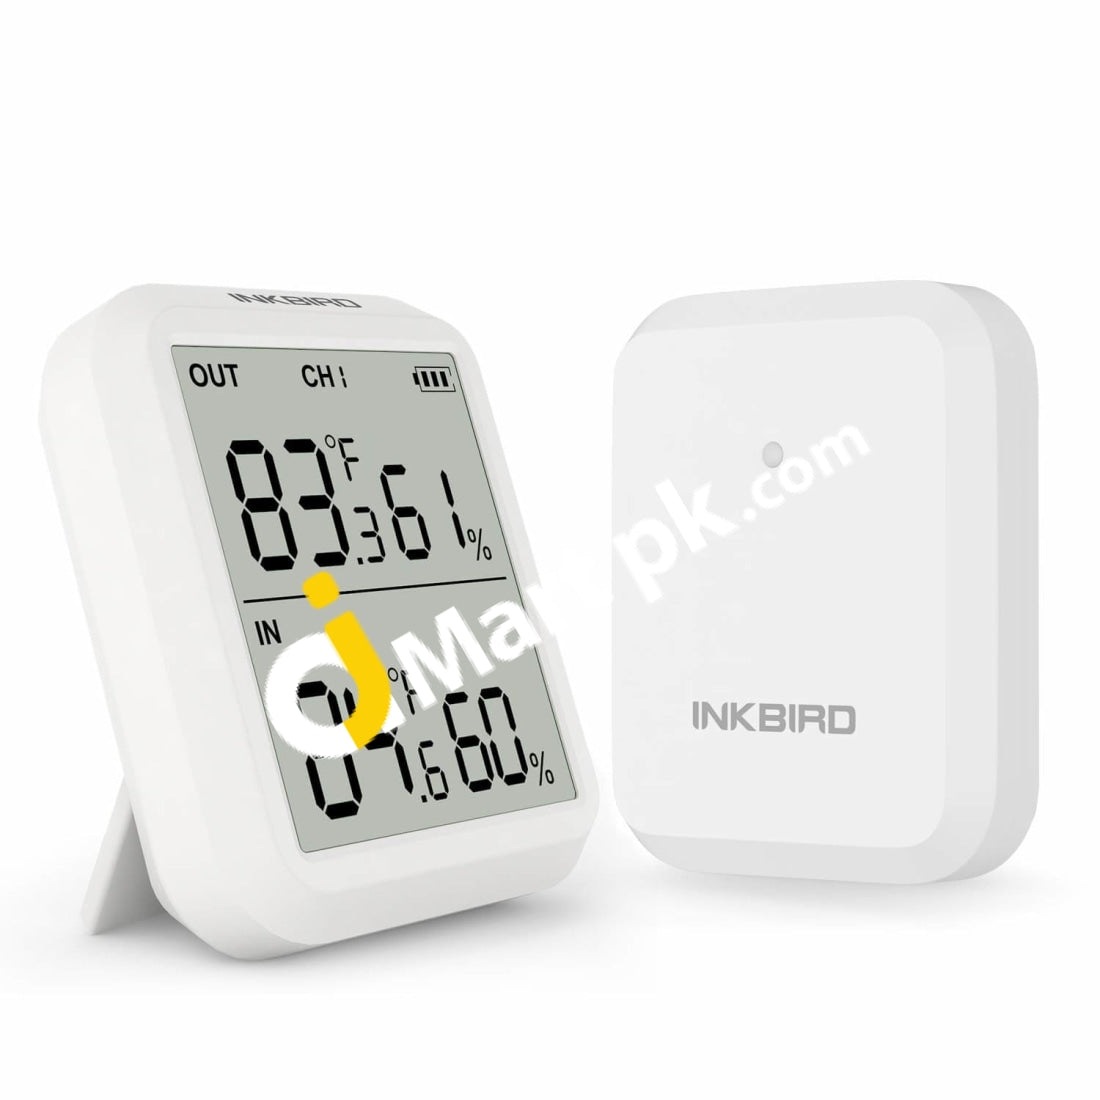 Outdoor Waterproof Thermometer for Temperature Monitoring